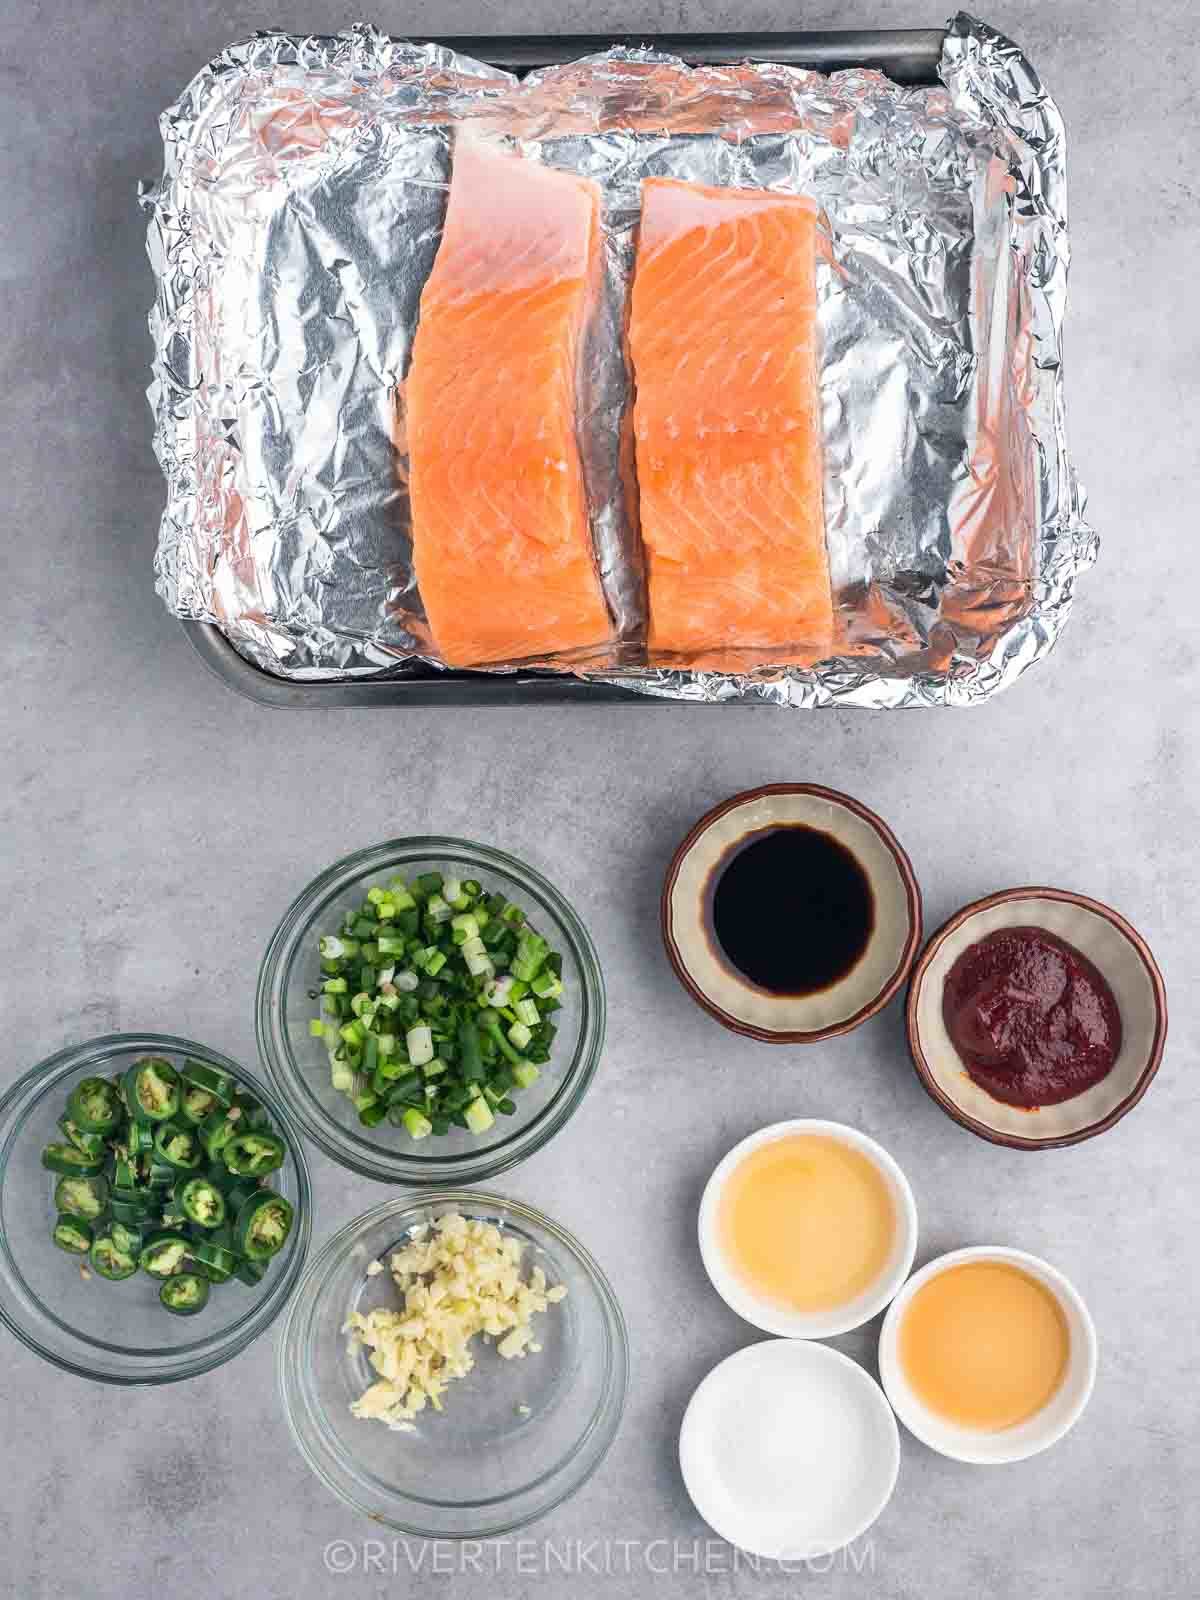 Baked Salmon with Gochujang Ingredients